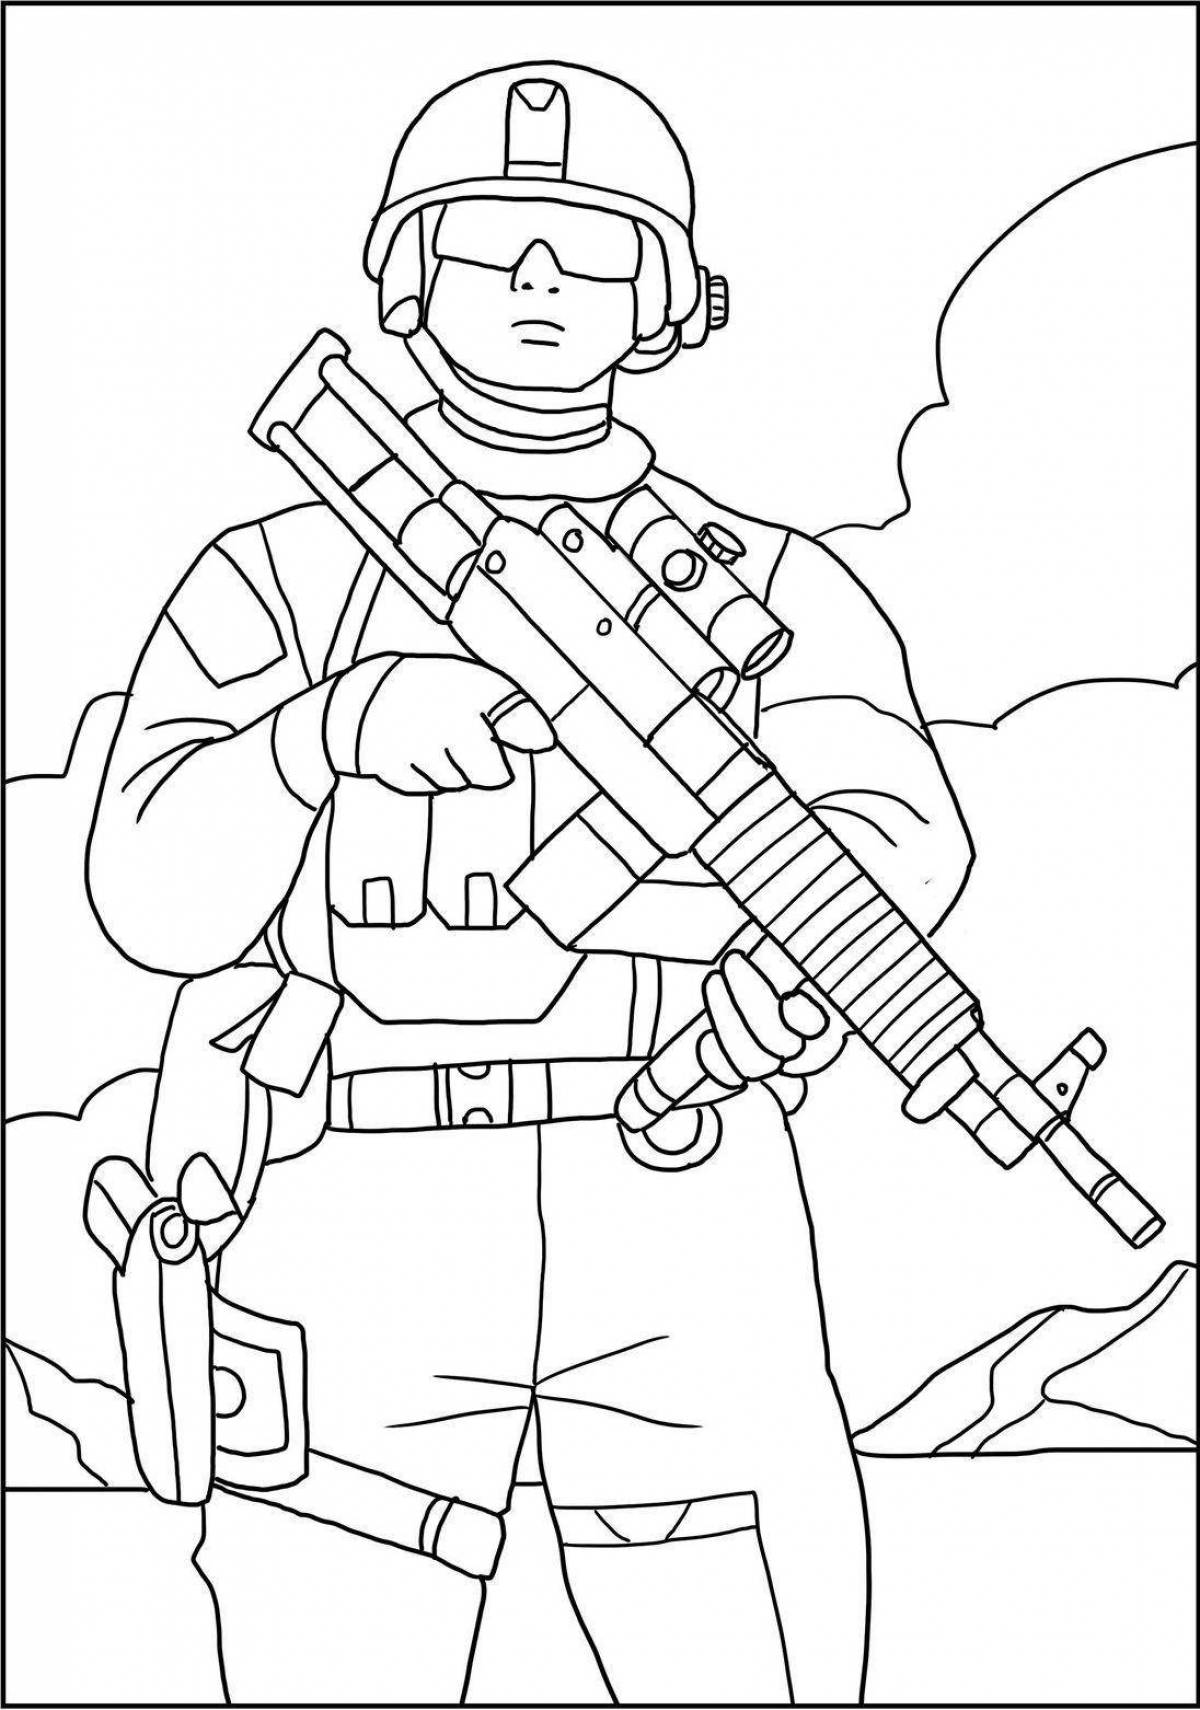 Adorable soldiers coloring book for kids 6-7 years old